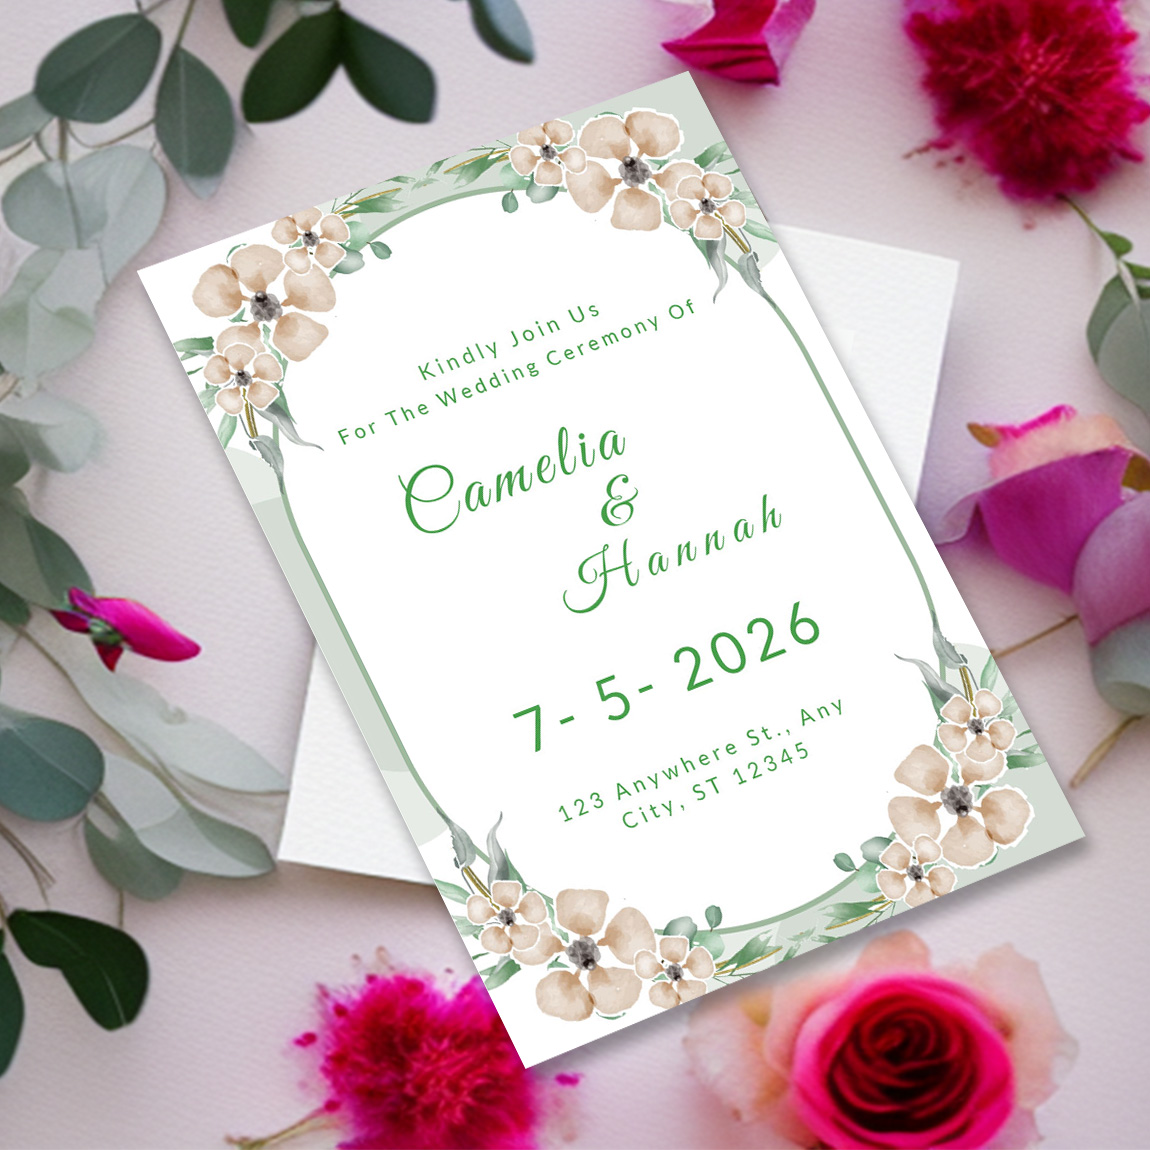 Image with enchanting wedding invitation in light green tones.